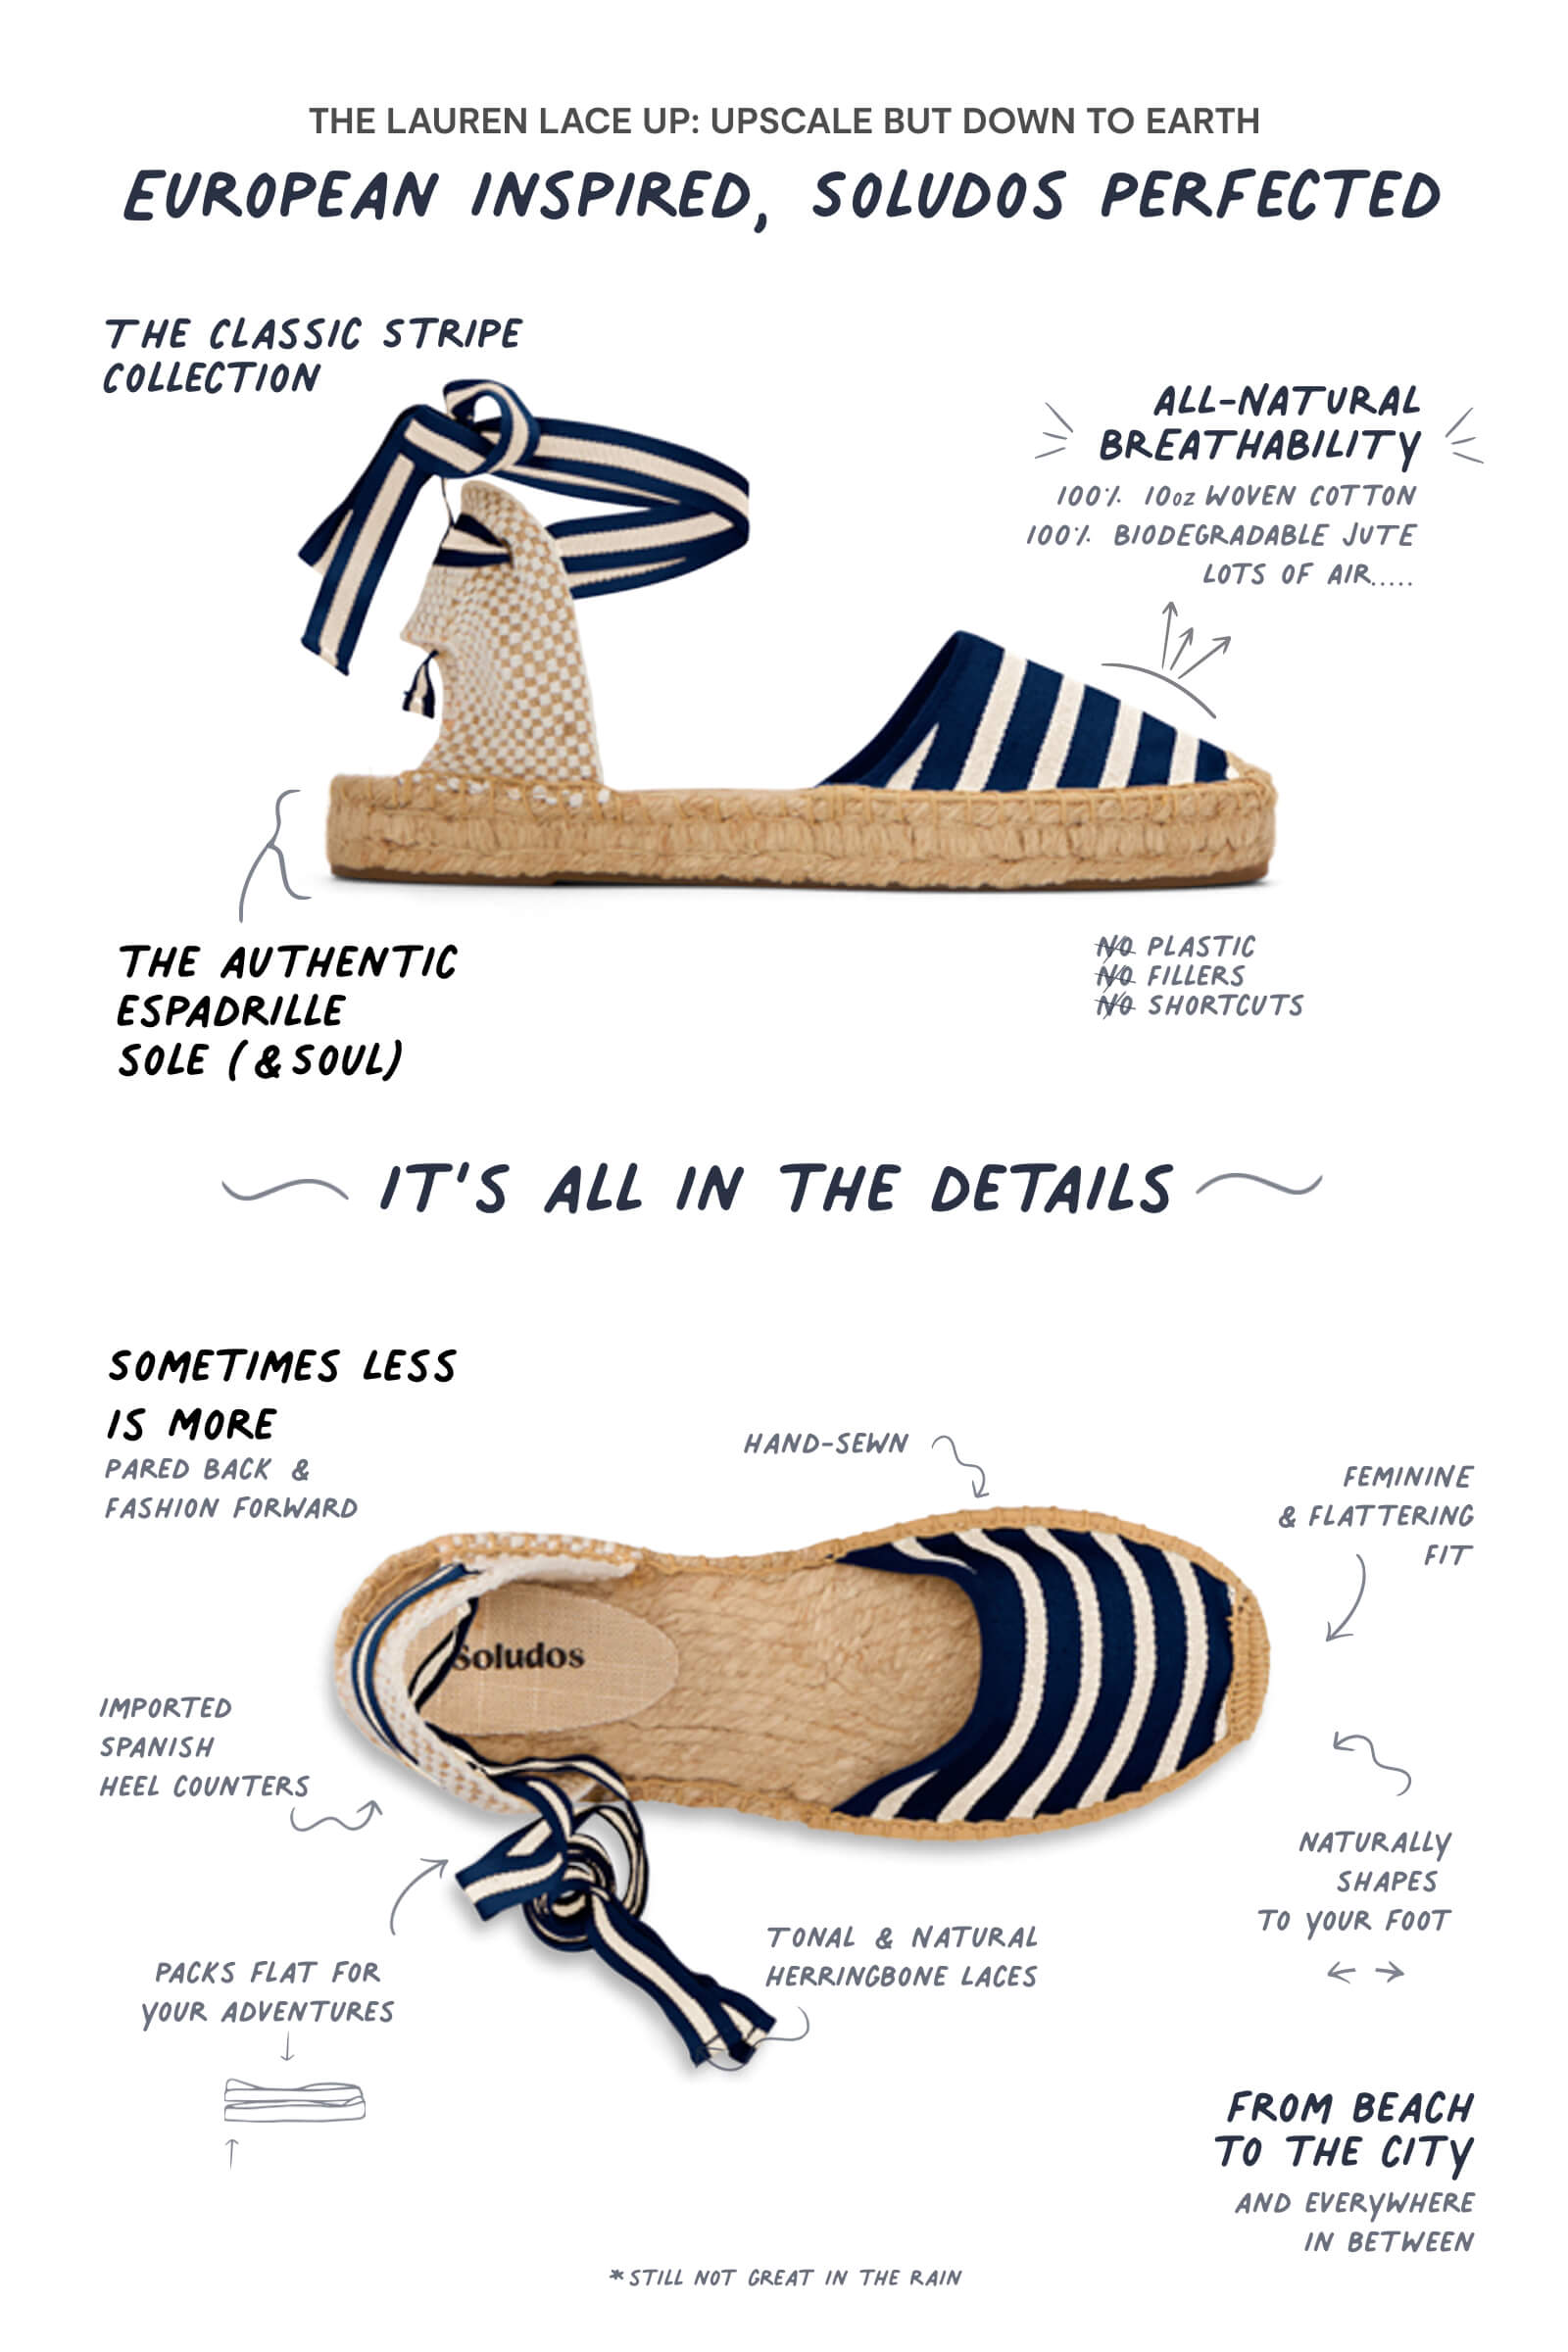 infographic of Lauren lace up